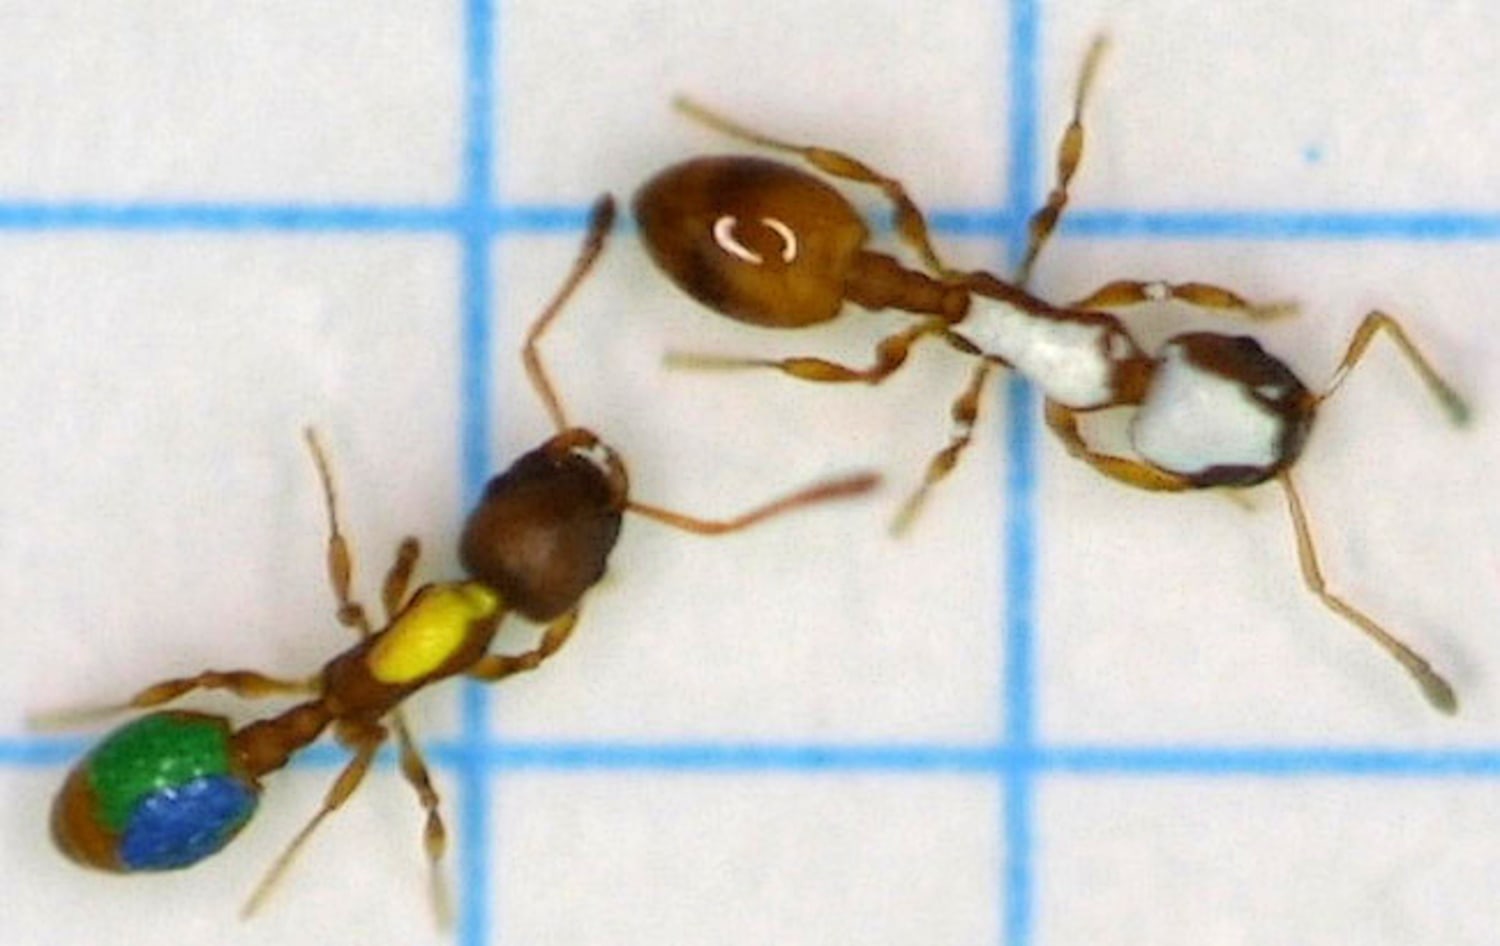 Ants help each other as teachers and pupils